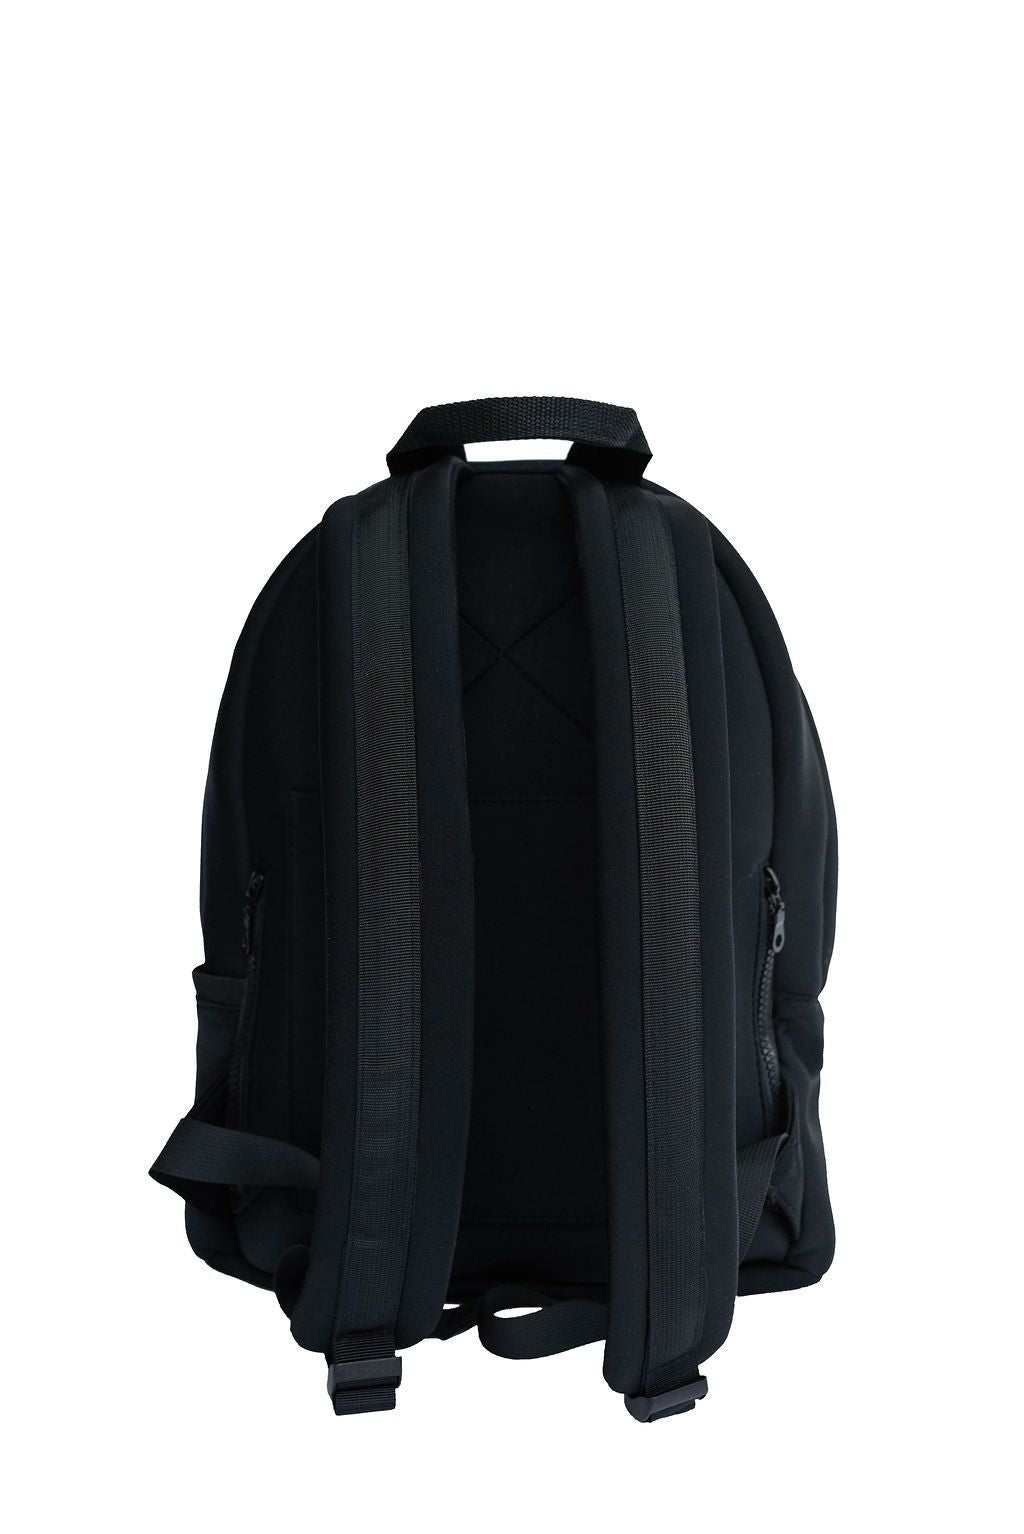 supportive backpack for women